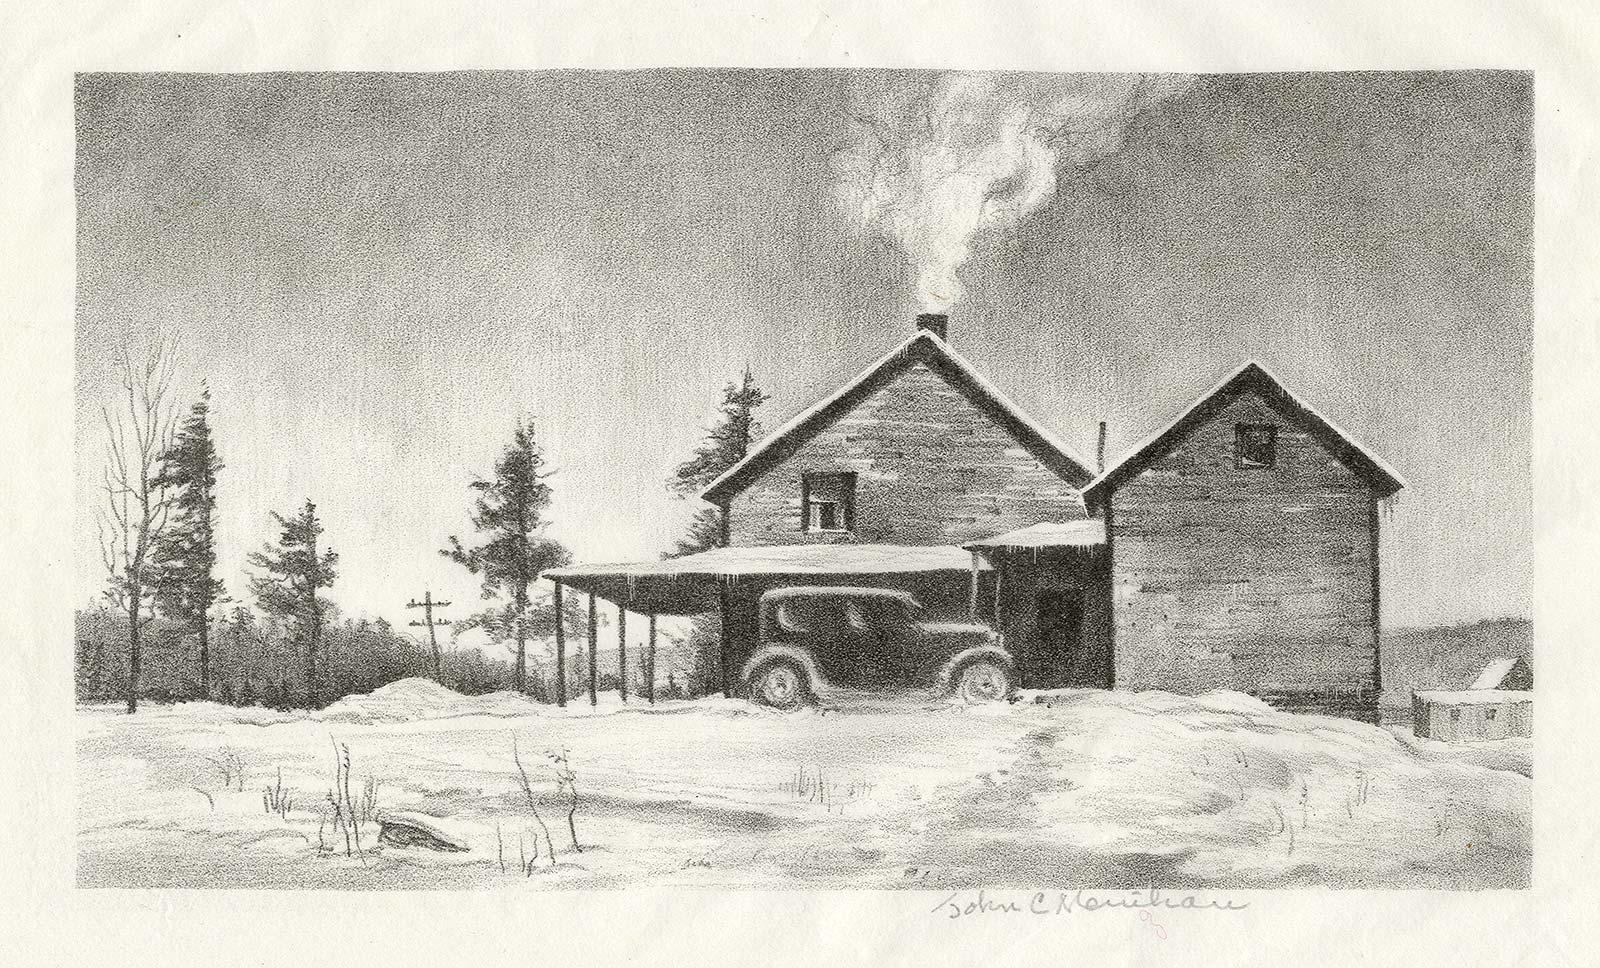 Leon's House (the warm home as a refuge on a cold day in upstate New York) - Gray Landscape Print by John Menihan